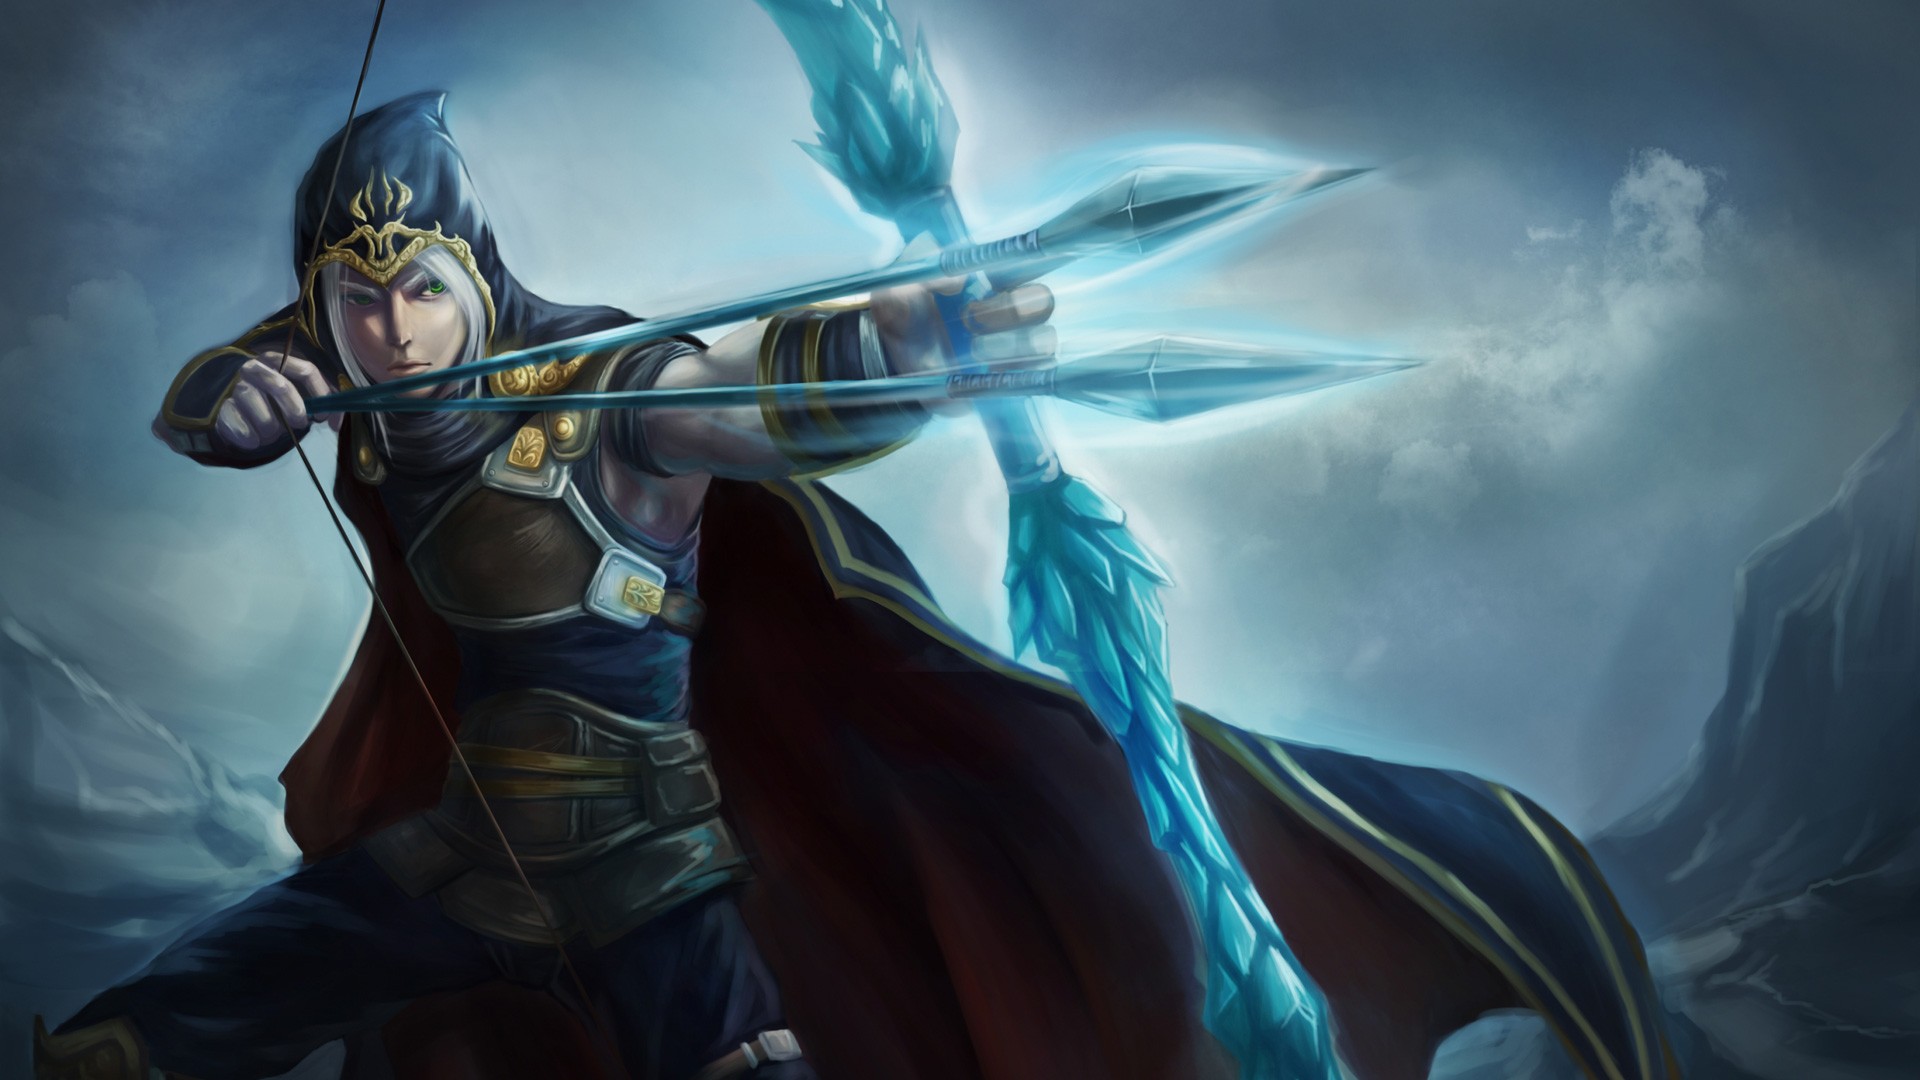 General 1920x1080 genderswap archer cyan bow arrows fantasy art Ashe (League of Legends) bow and arrow PC gaming video game men fantasy men aiming